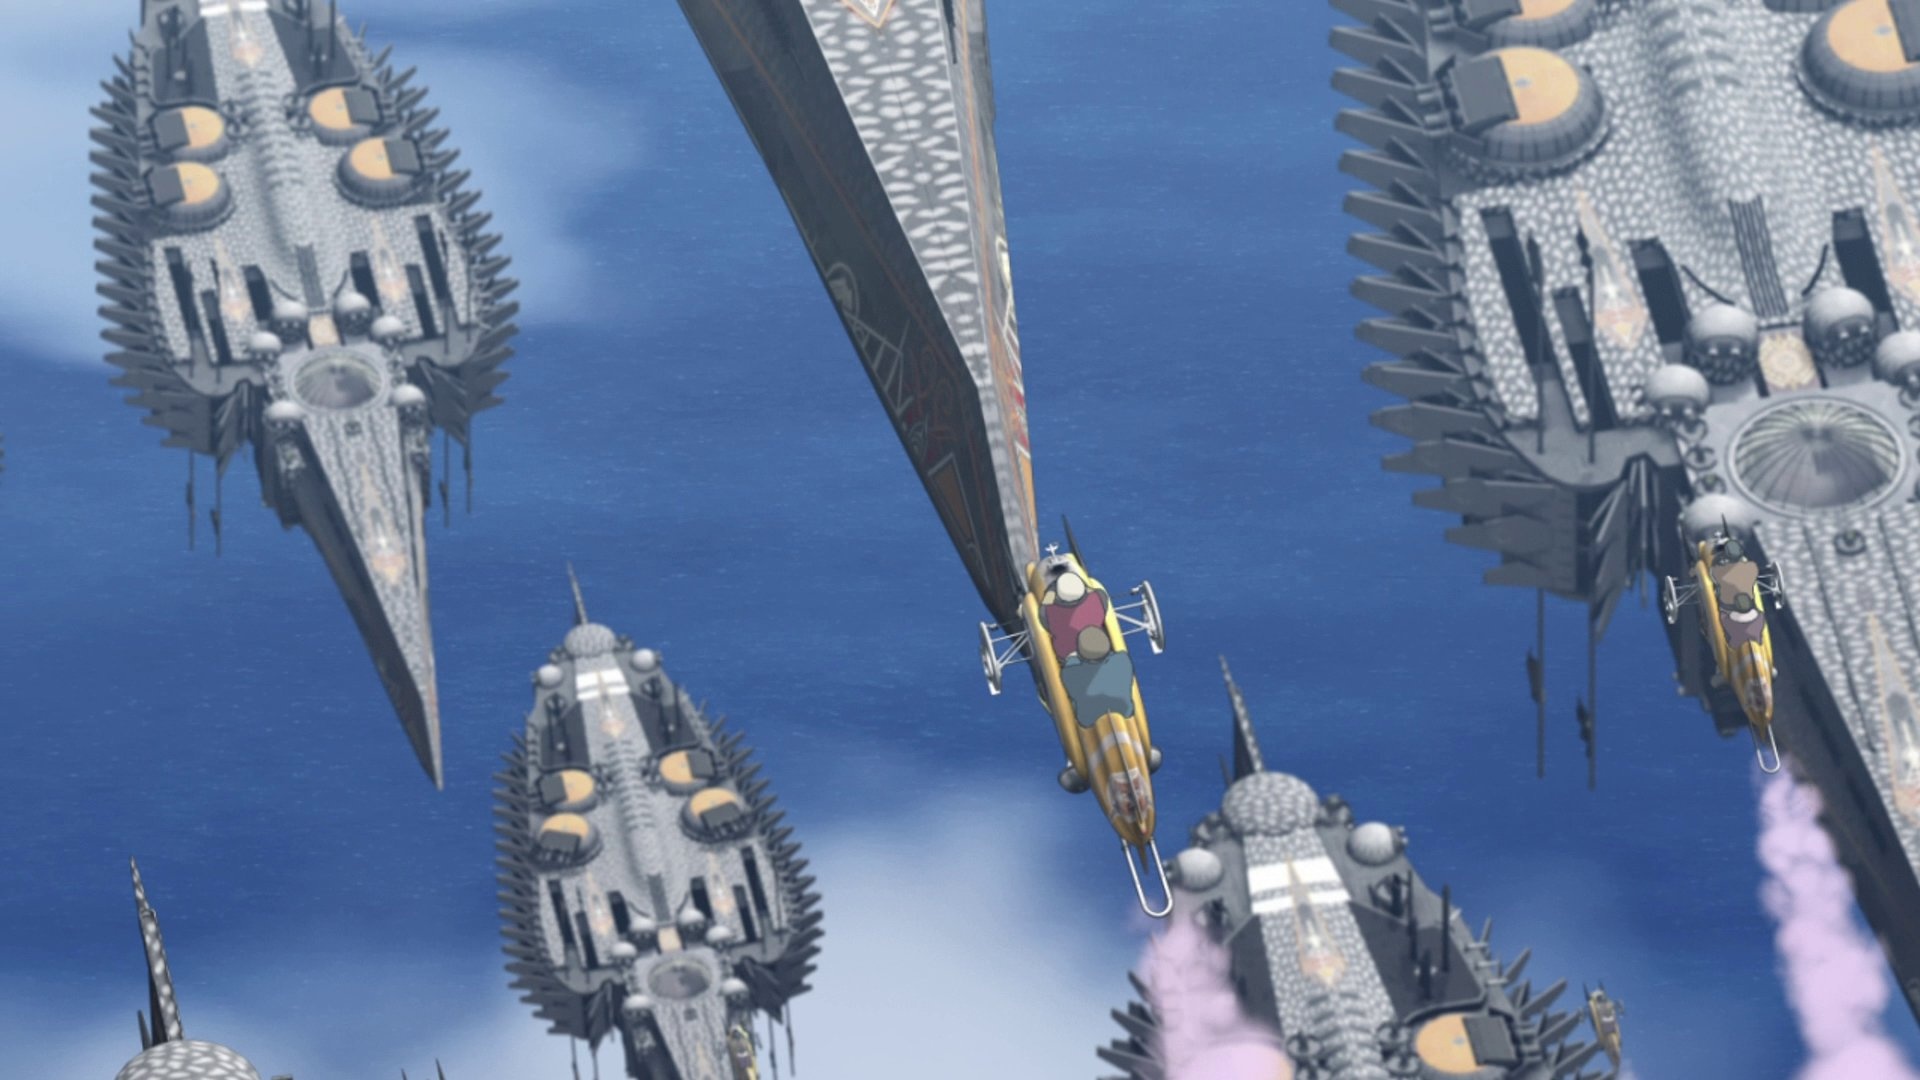 Last Exile anime, Silver Wing part 1, Fam the Silver Wing, Minagith, 1920x1080 Full HD Desktop